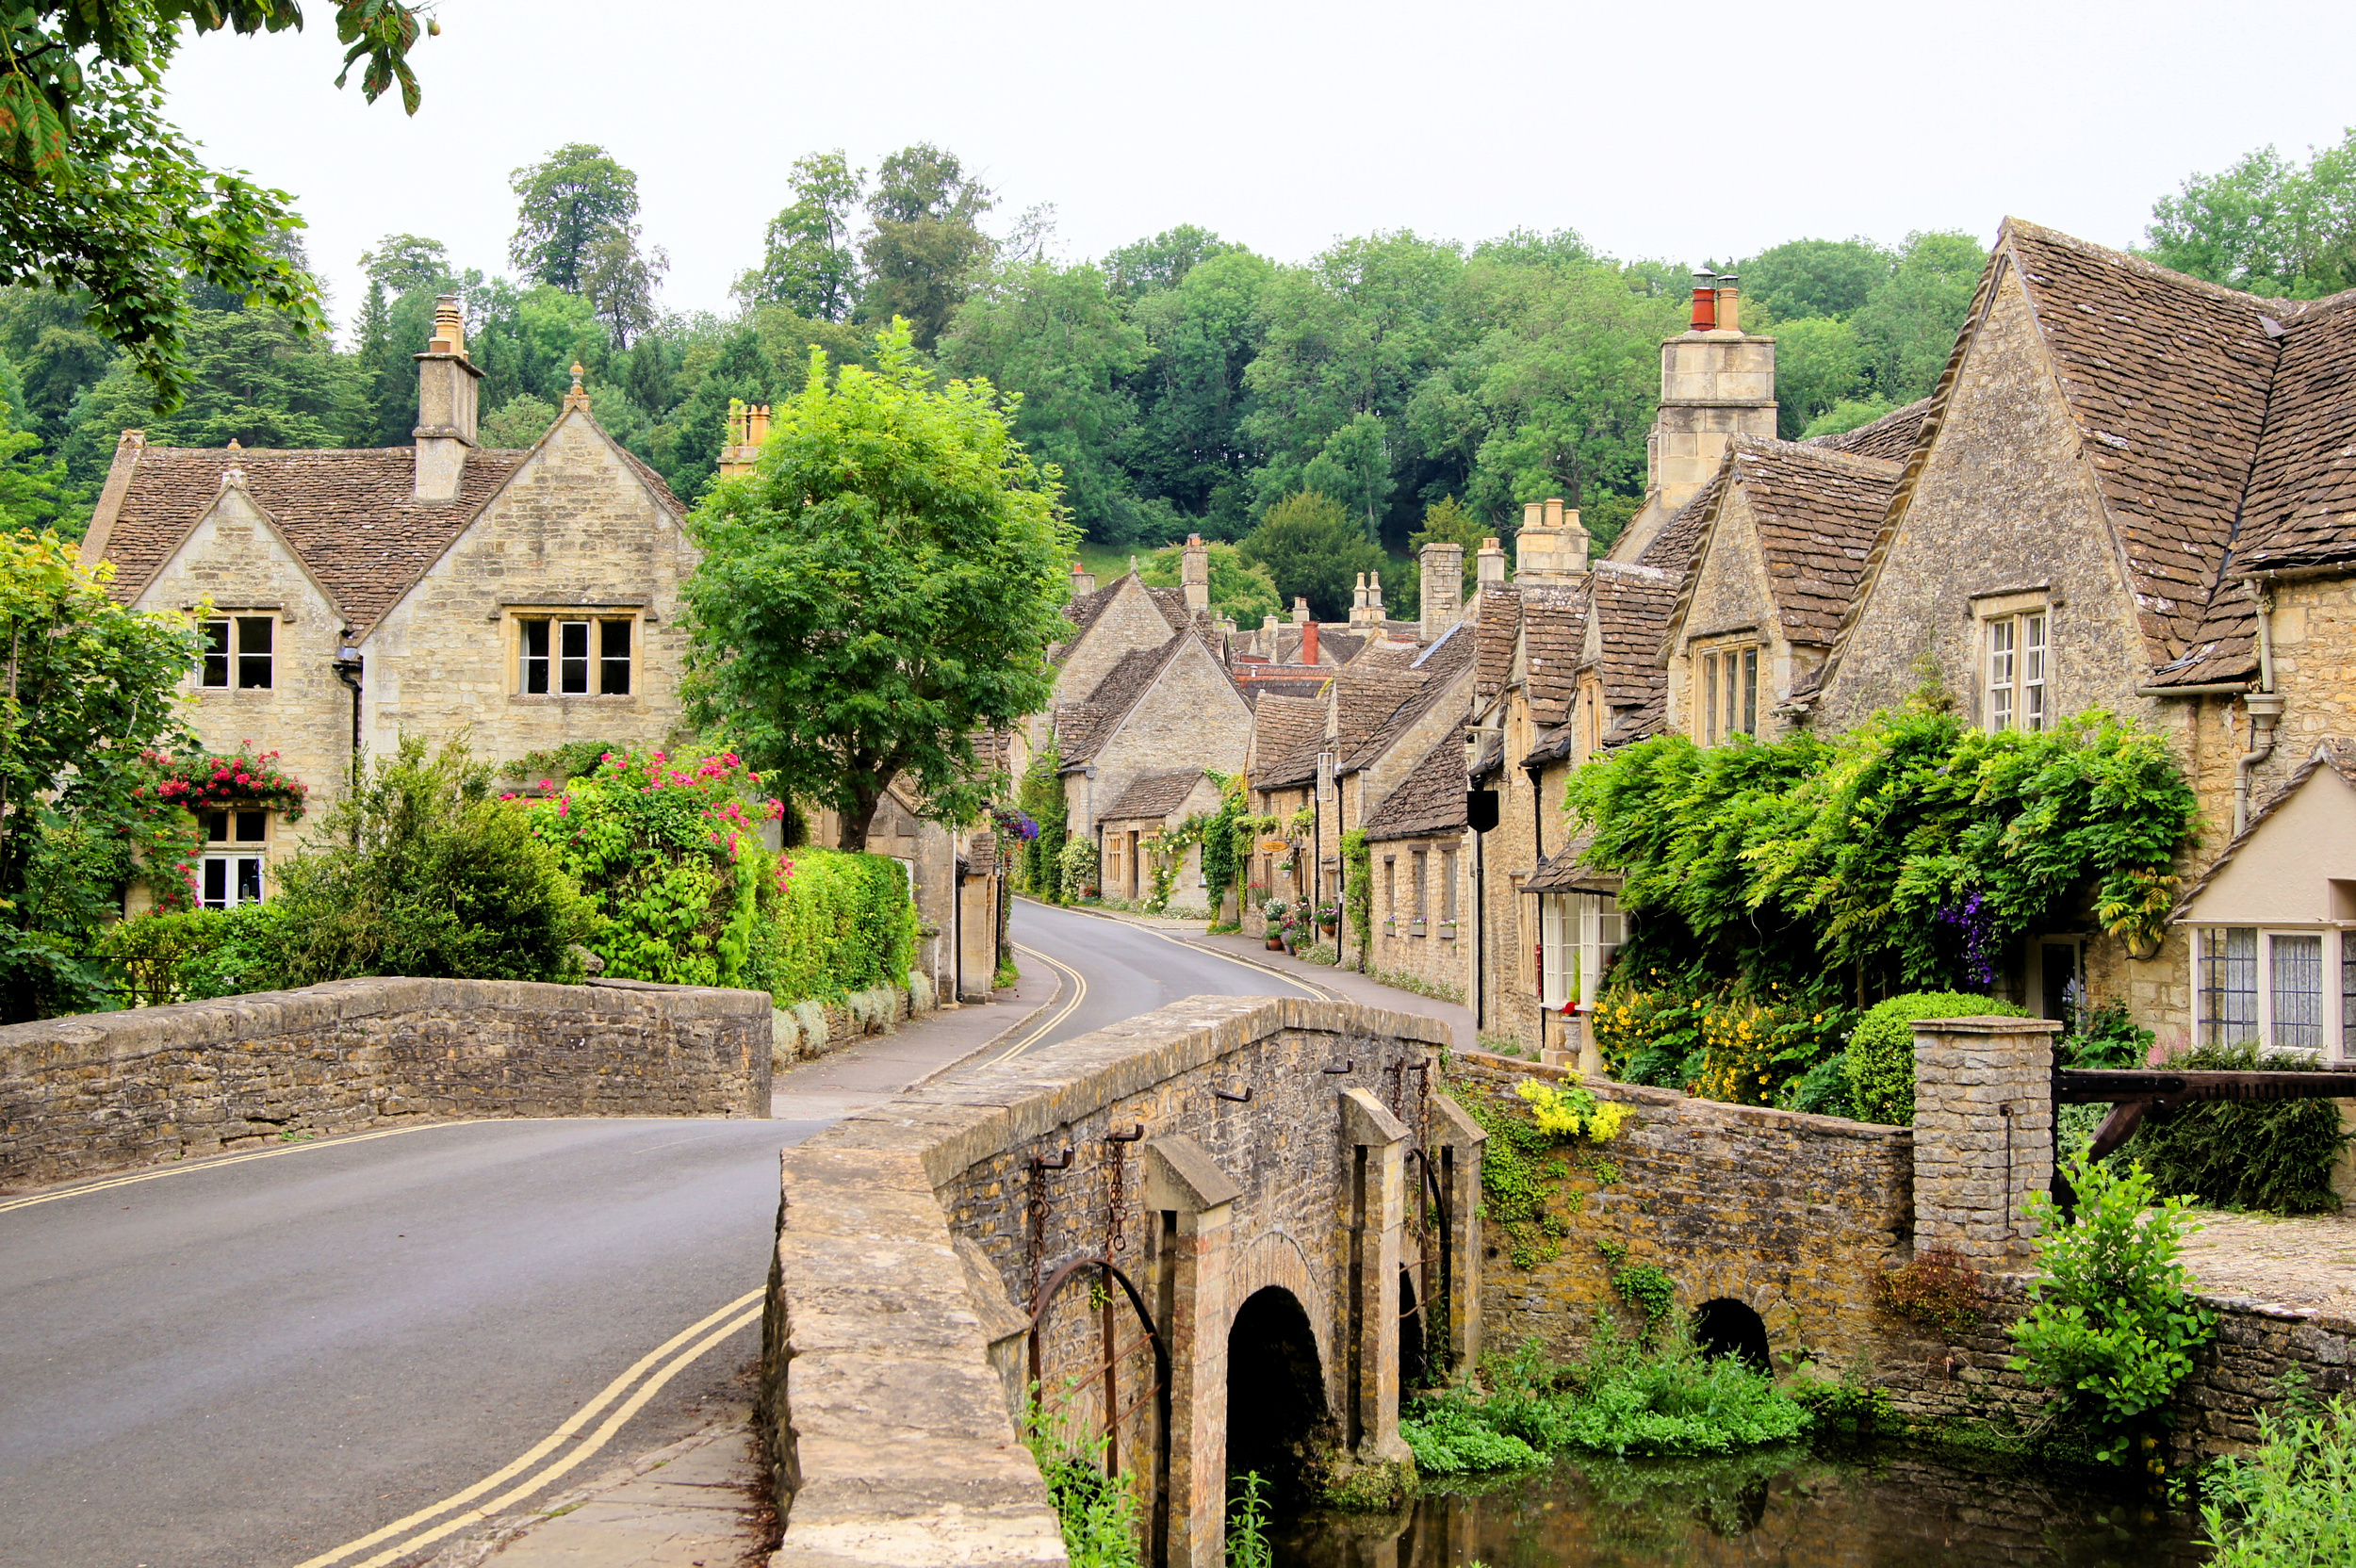 <p>This storybook part of the United Kingdom is full of adorable thatched cottages, scenic walking routes, and villages plucked from a Miss Marple episode. The towns are best explored with a car but can also be walked between if you’re keen on some hiking!</p><p>You may also like: <a href='https://www.yardbarker.com/lifestyle/articles/the_20_best_breweries_to_visit_in_the_united_states/s1__40026304'>The 20 best breweries to visit in the United States</a></p>